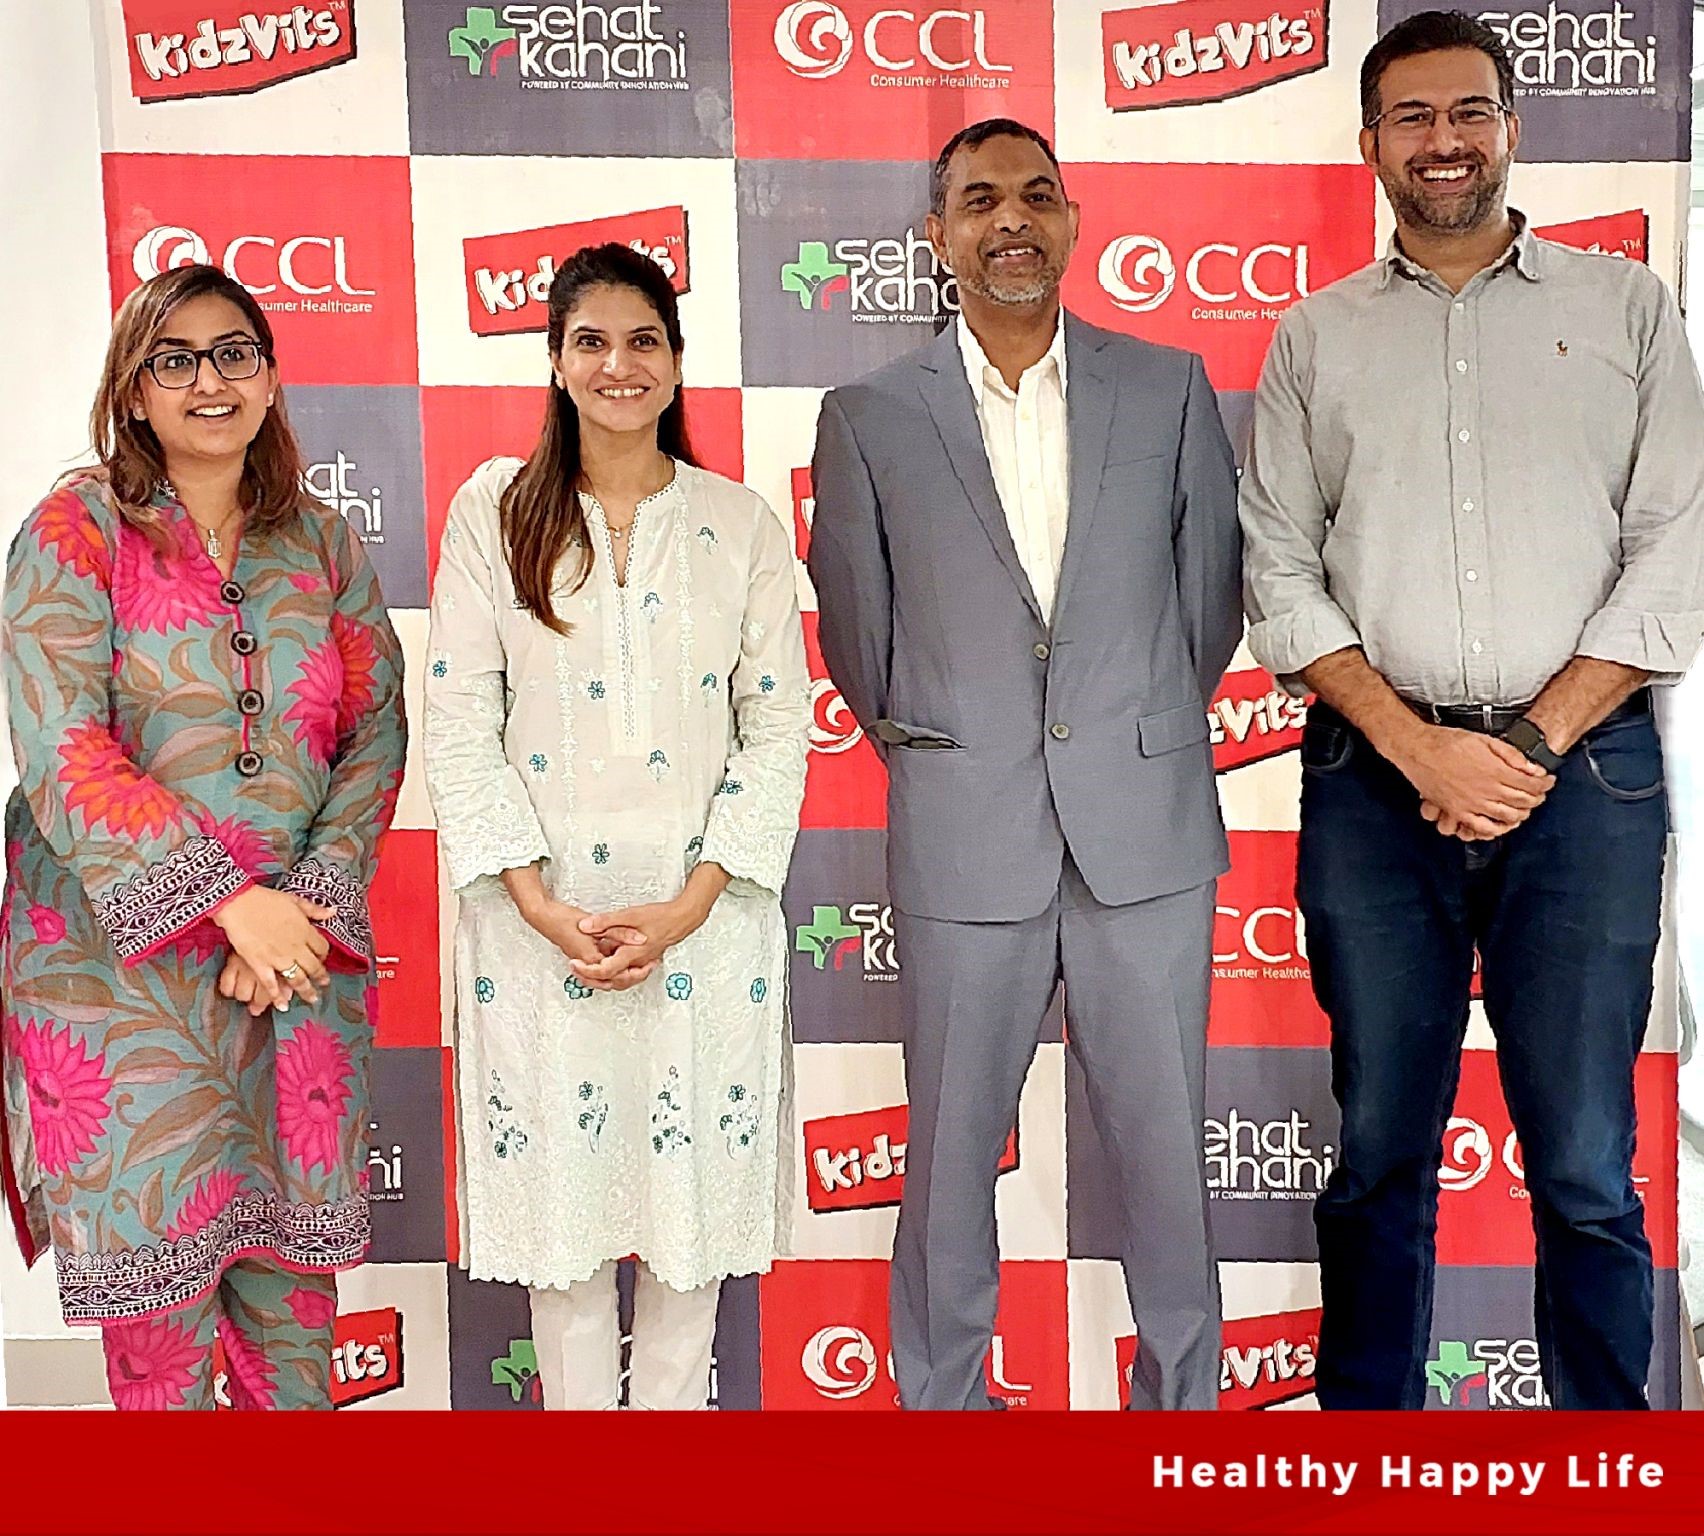 CCL Consumer Healthcare’s KidzVits signs MOU with Sehat Kahani